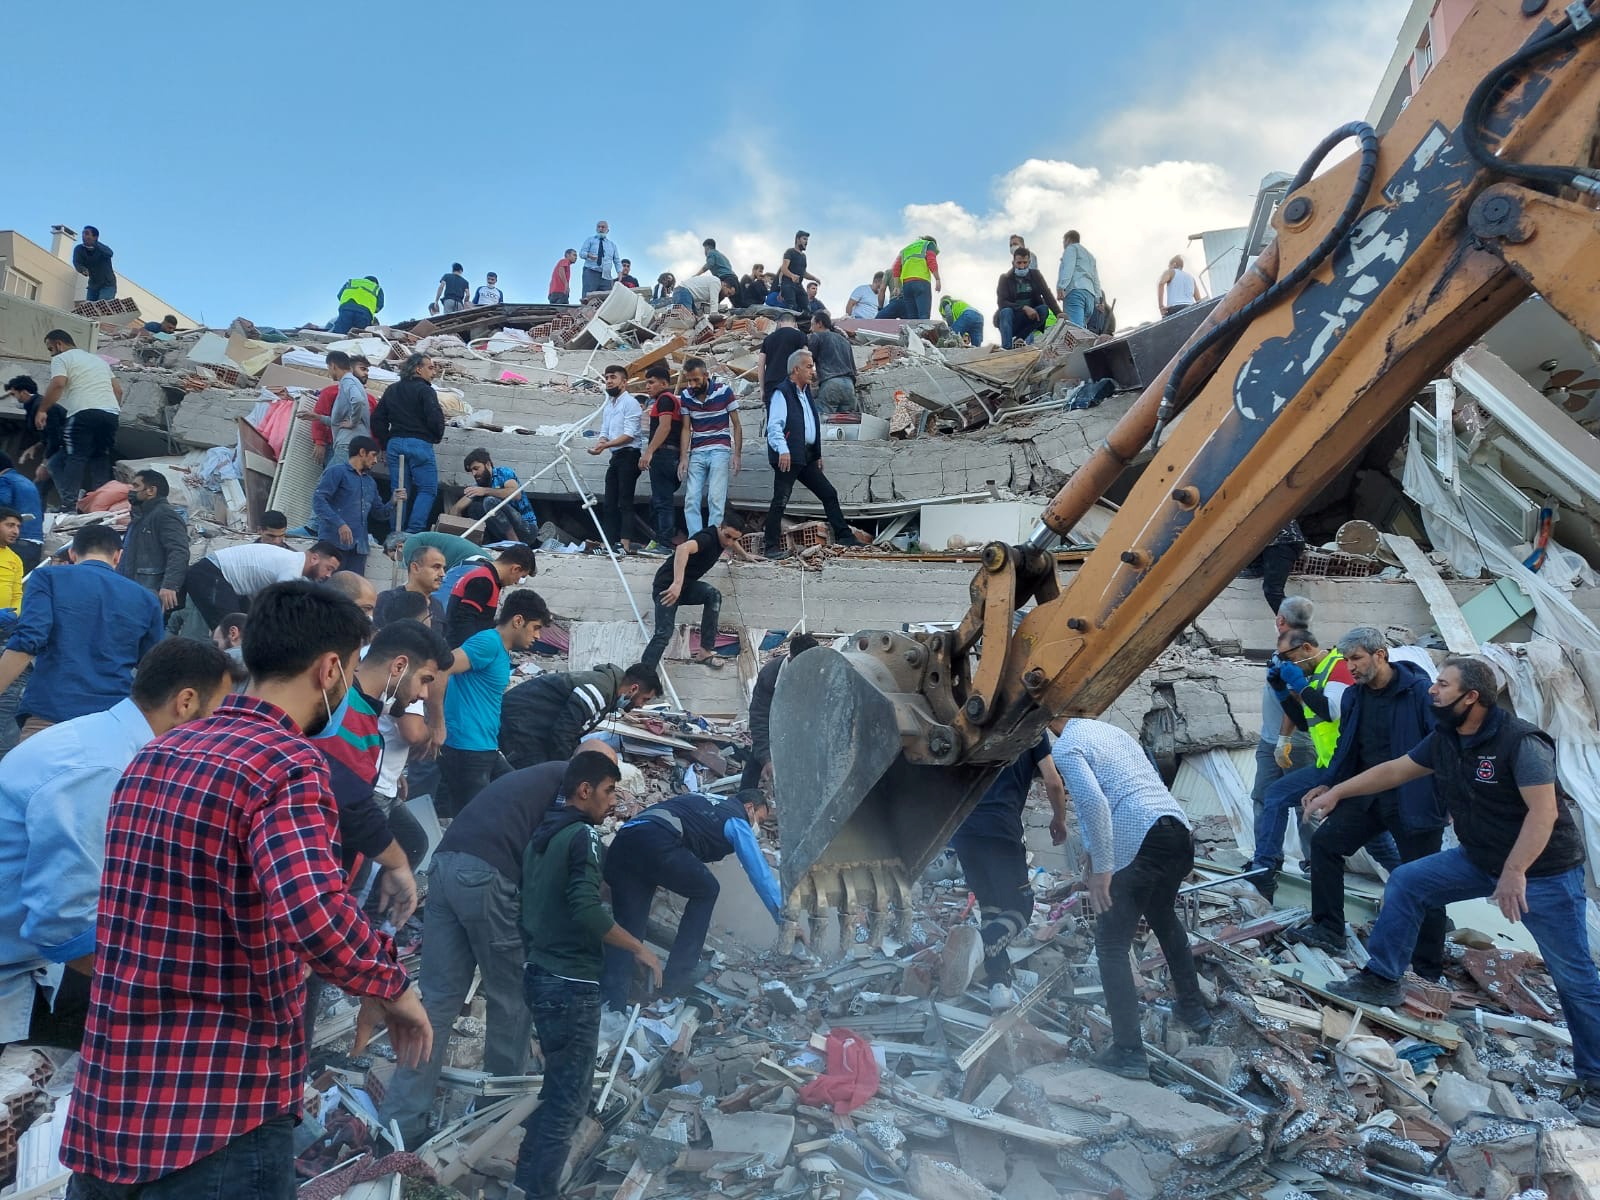 Locals and officials search for survivors at a collapsed building after a strong earthquake struck the Aegean Sea on Friday and was felt in both Greece and Turkey, where some buildings collapsed in the coastal province of Izmir, Turkey, October 30, 2020. REUTERS/Tuncay Dersinlioglu